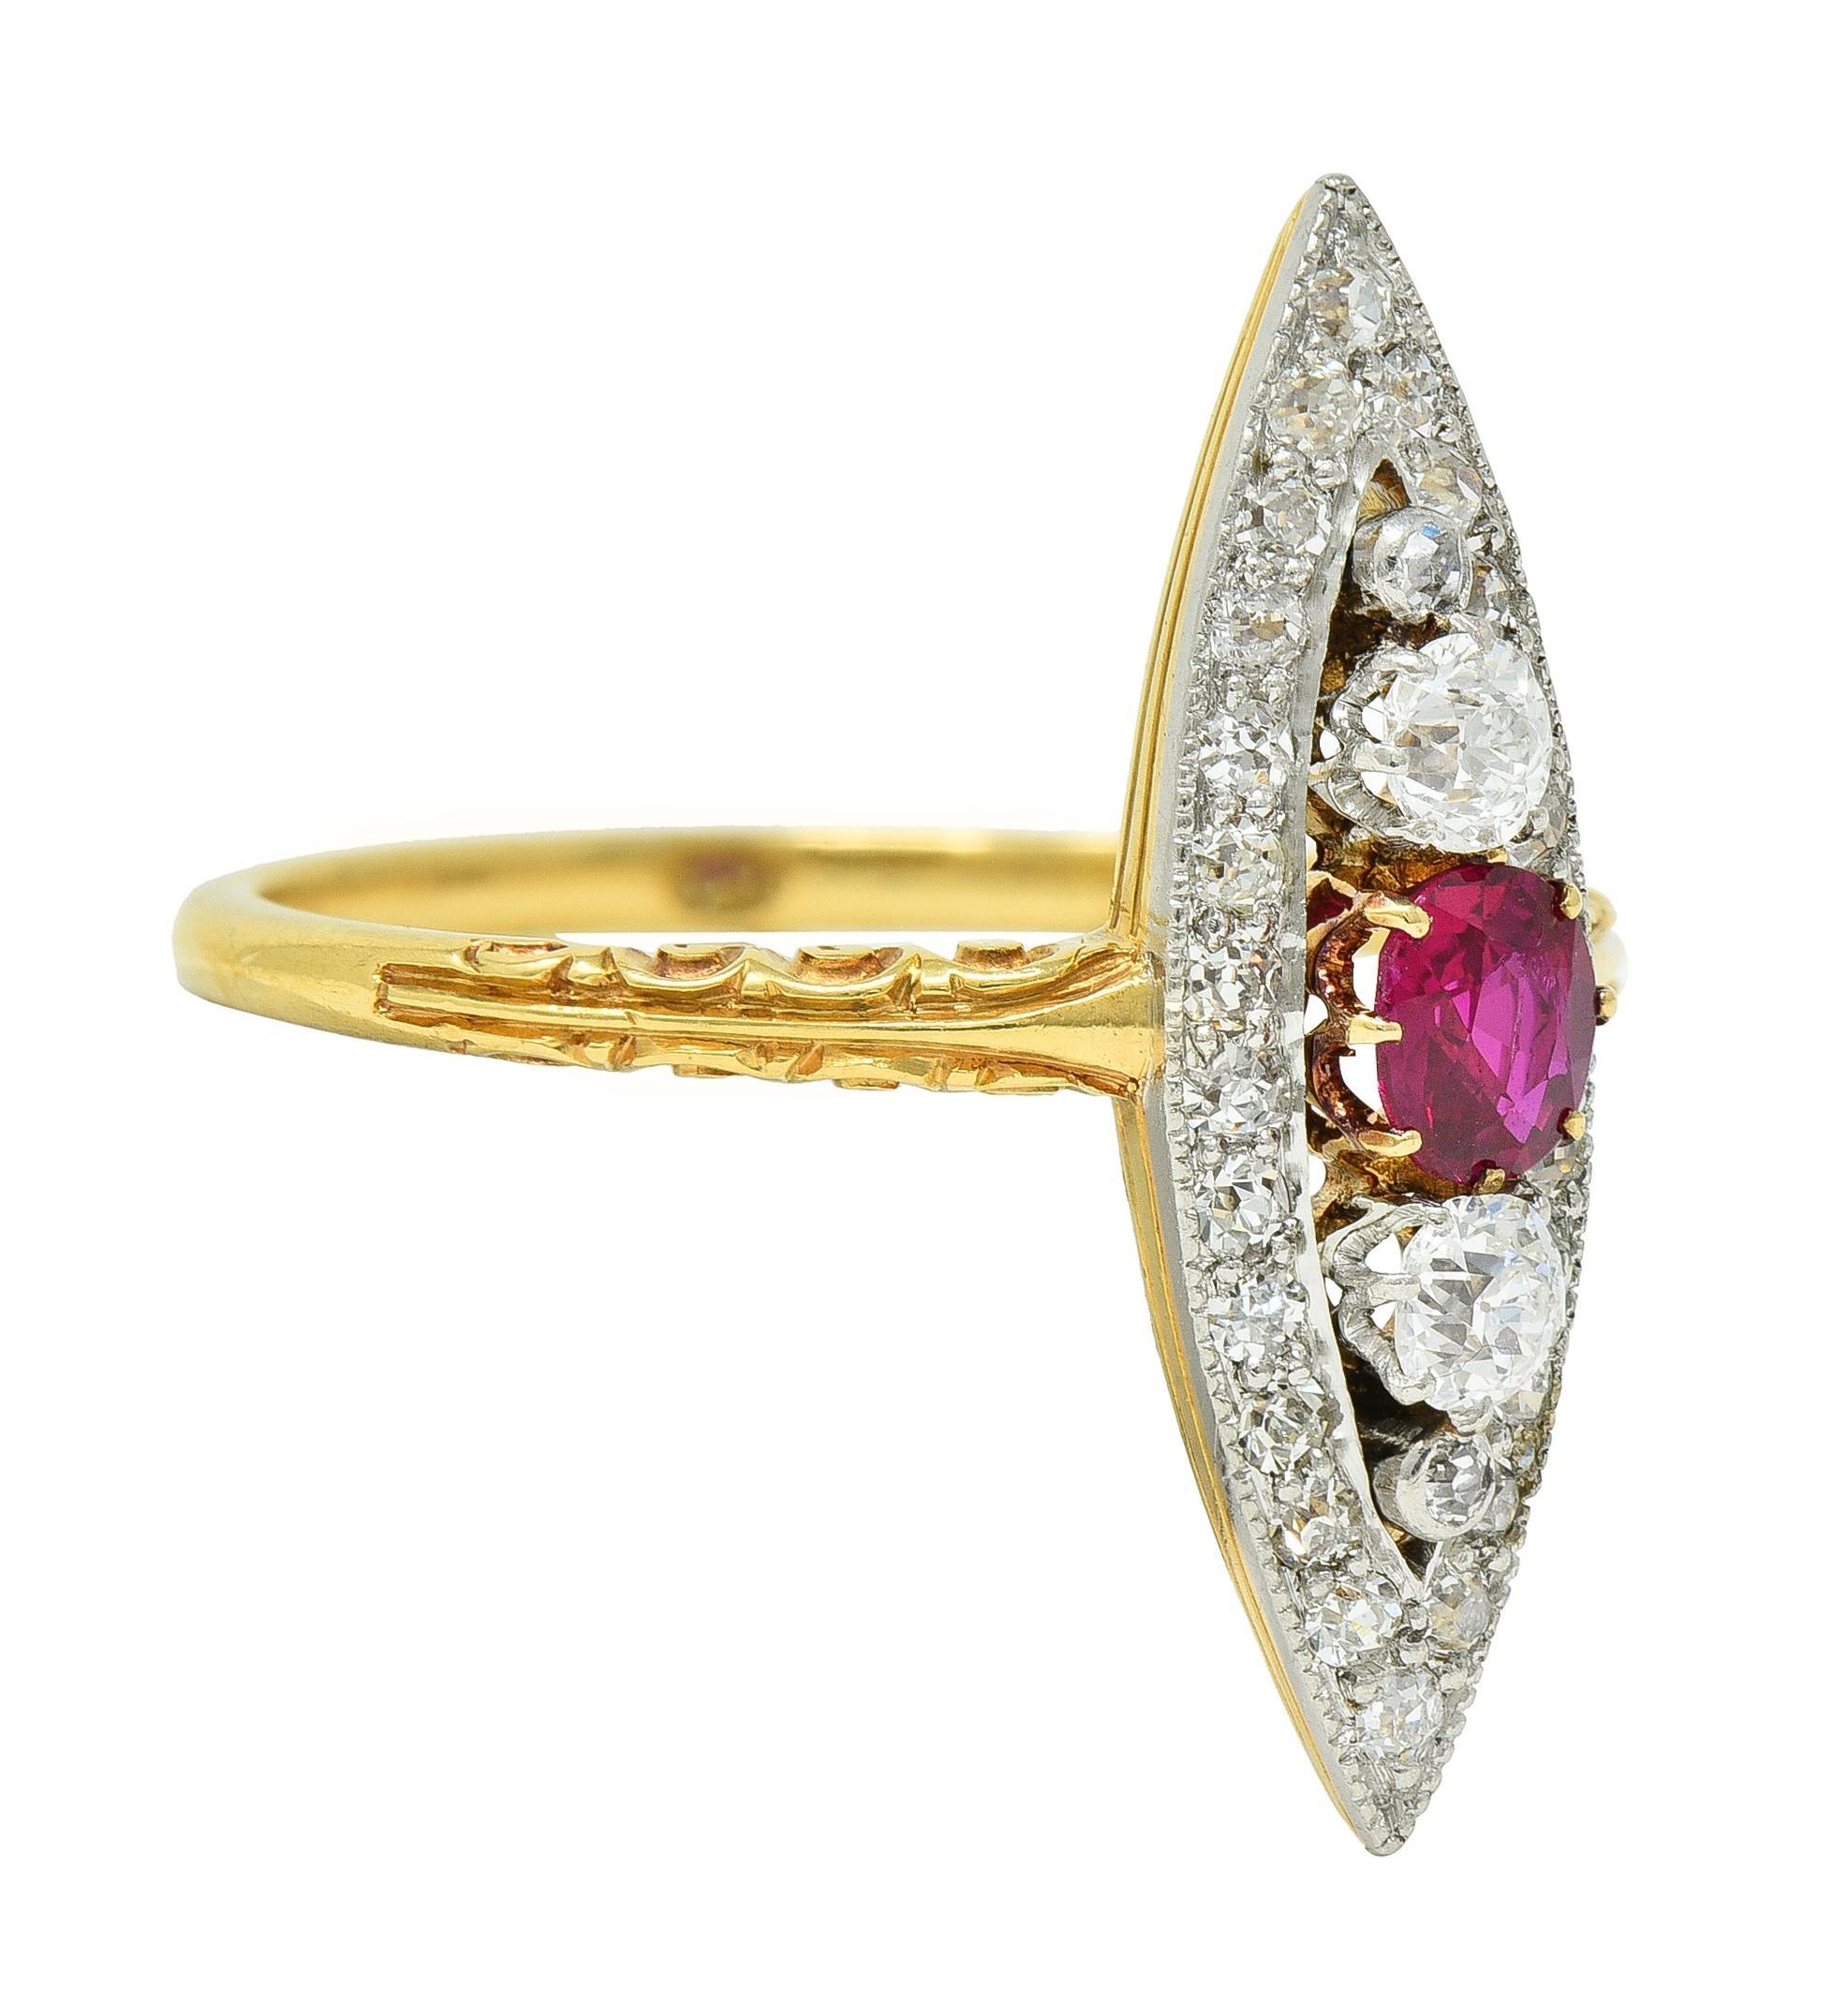 Centering a cushion cut ruby weighing approximately 0.32 carat total - transparent medium red
Prong set and flanked north to south by old European cut diamonds 
Prong and bezel set with a recessed navette-shaped surround 
Bead set throughout with